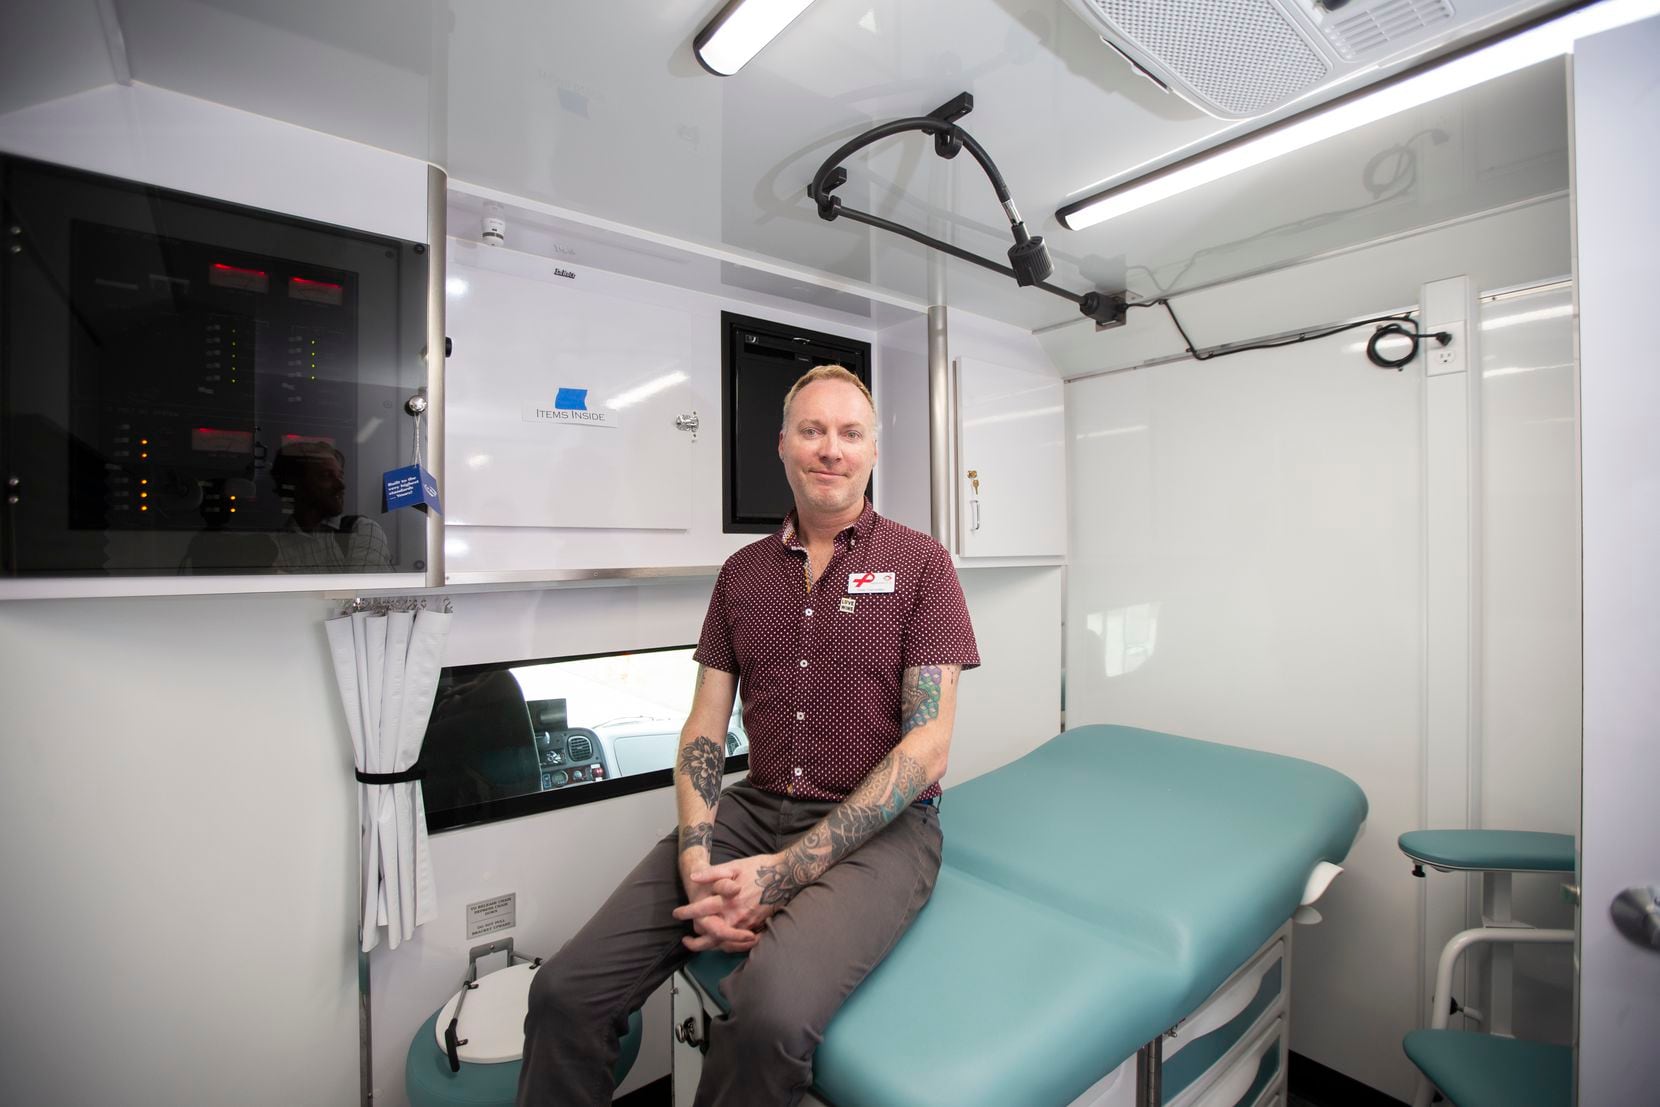 Timo Cervantez, mobile testing unit coordinator at Resource Center, is shown in an exam room inside the SexyHealth HIV testing mobile unit.